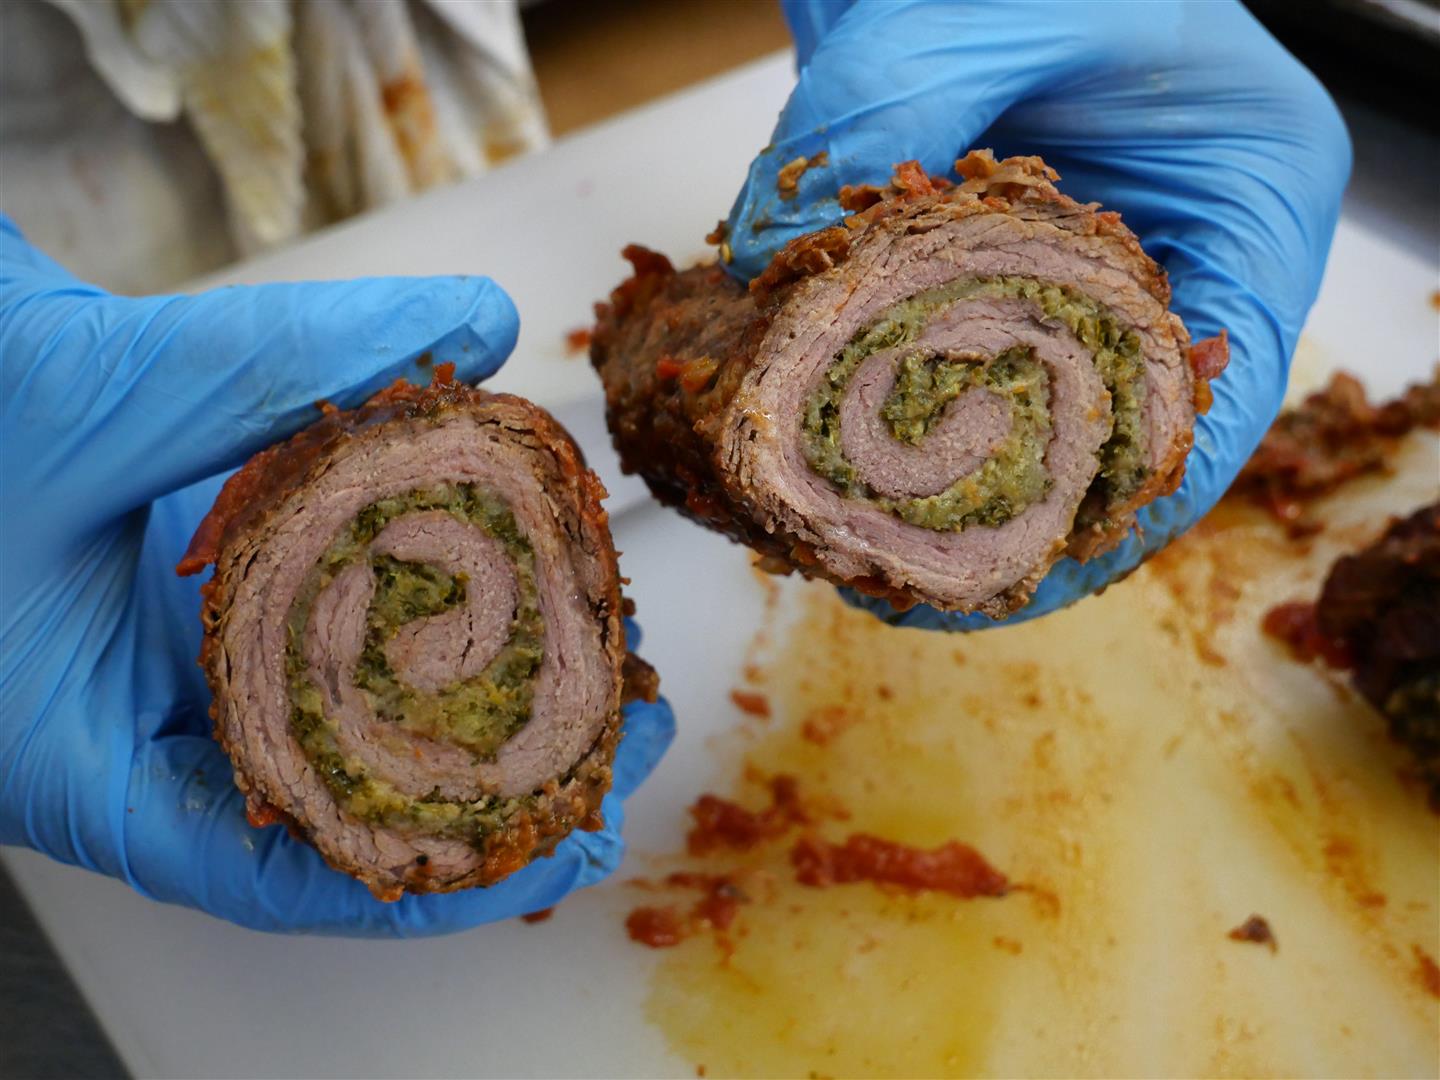 Braciole - beef braised in tomato sauce and filled with veggies